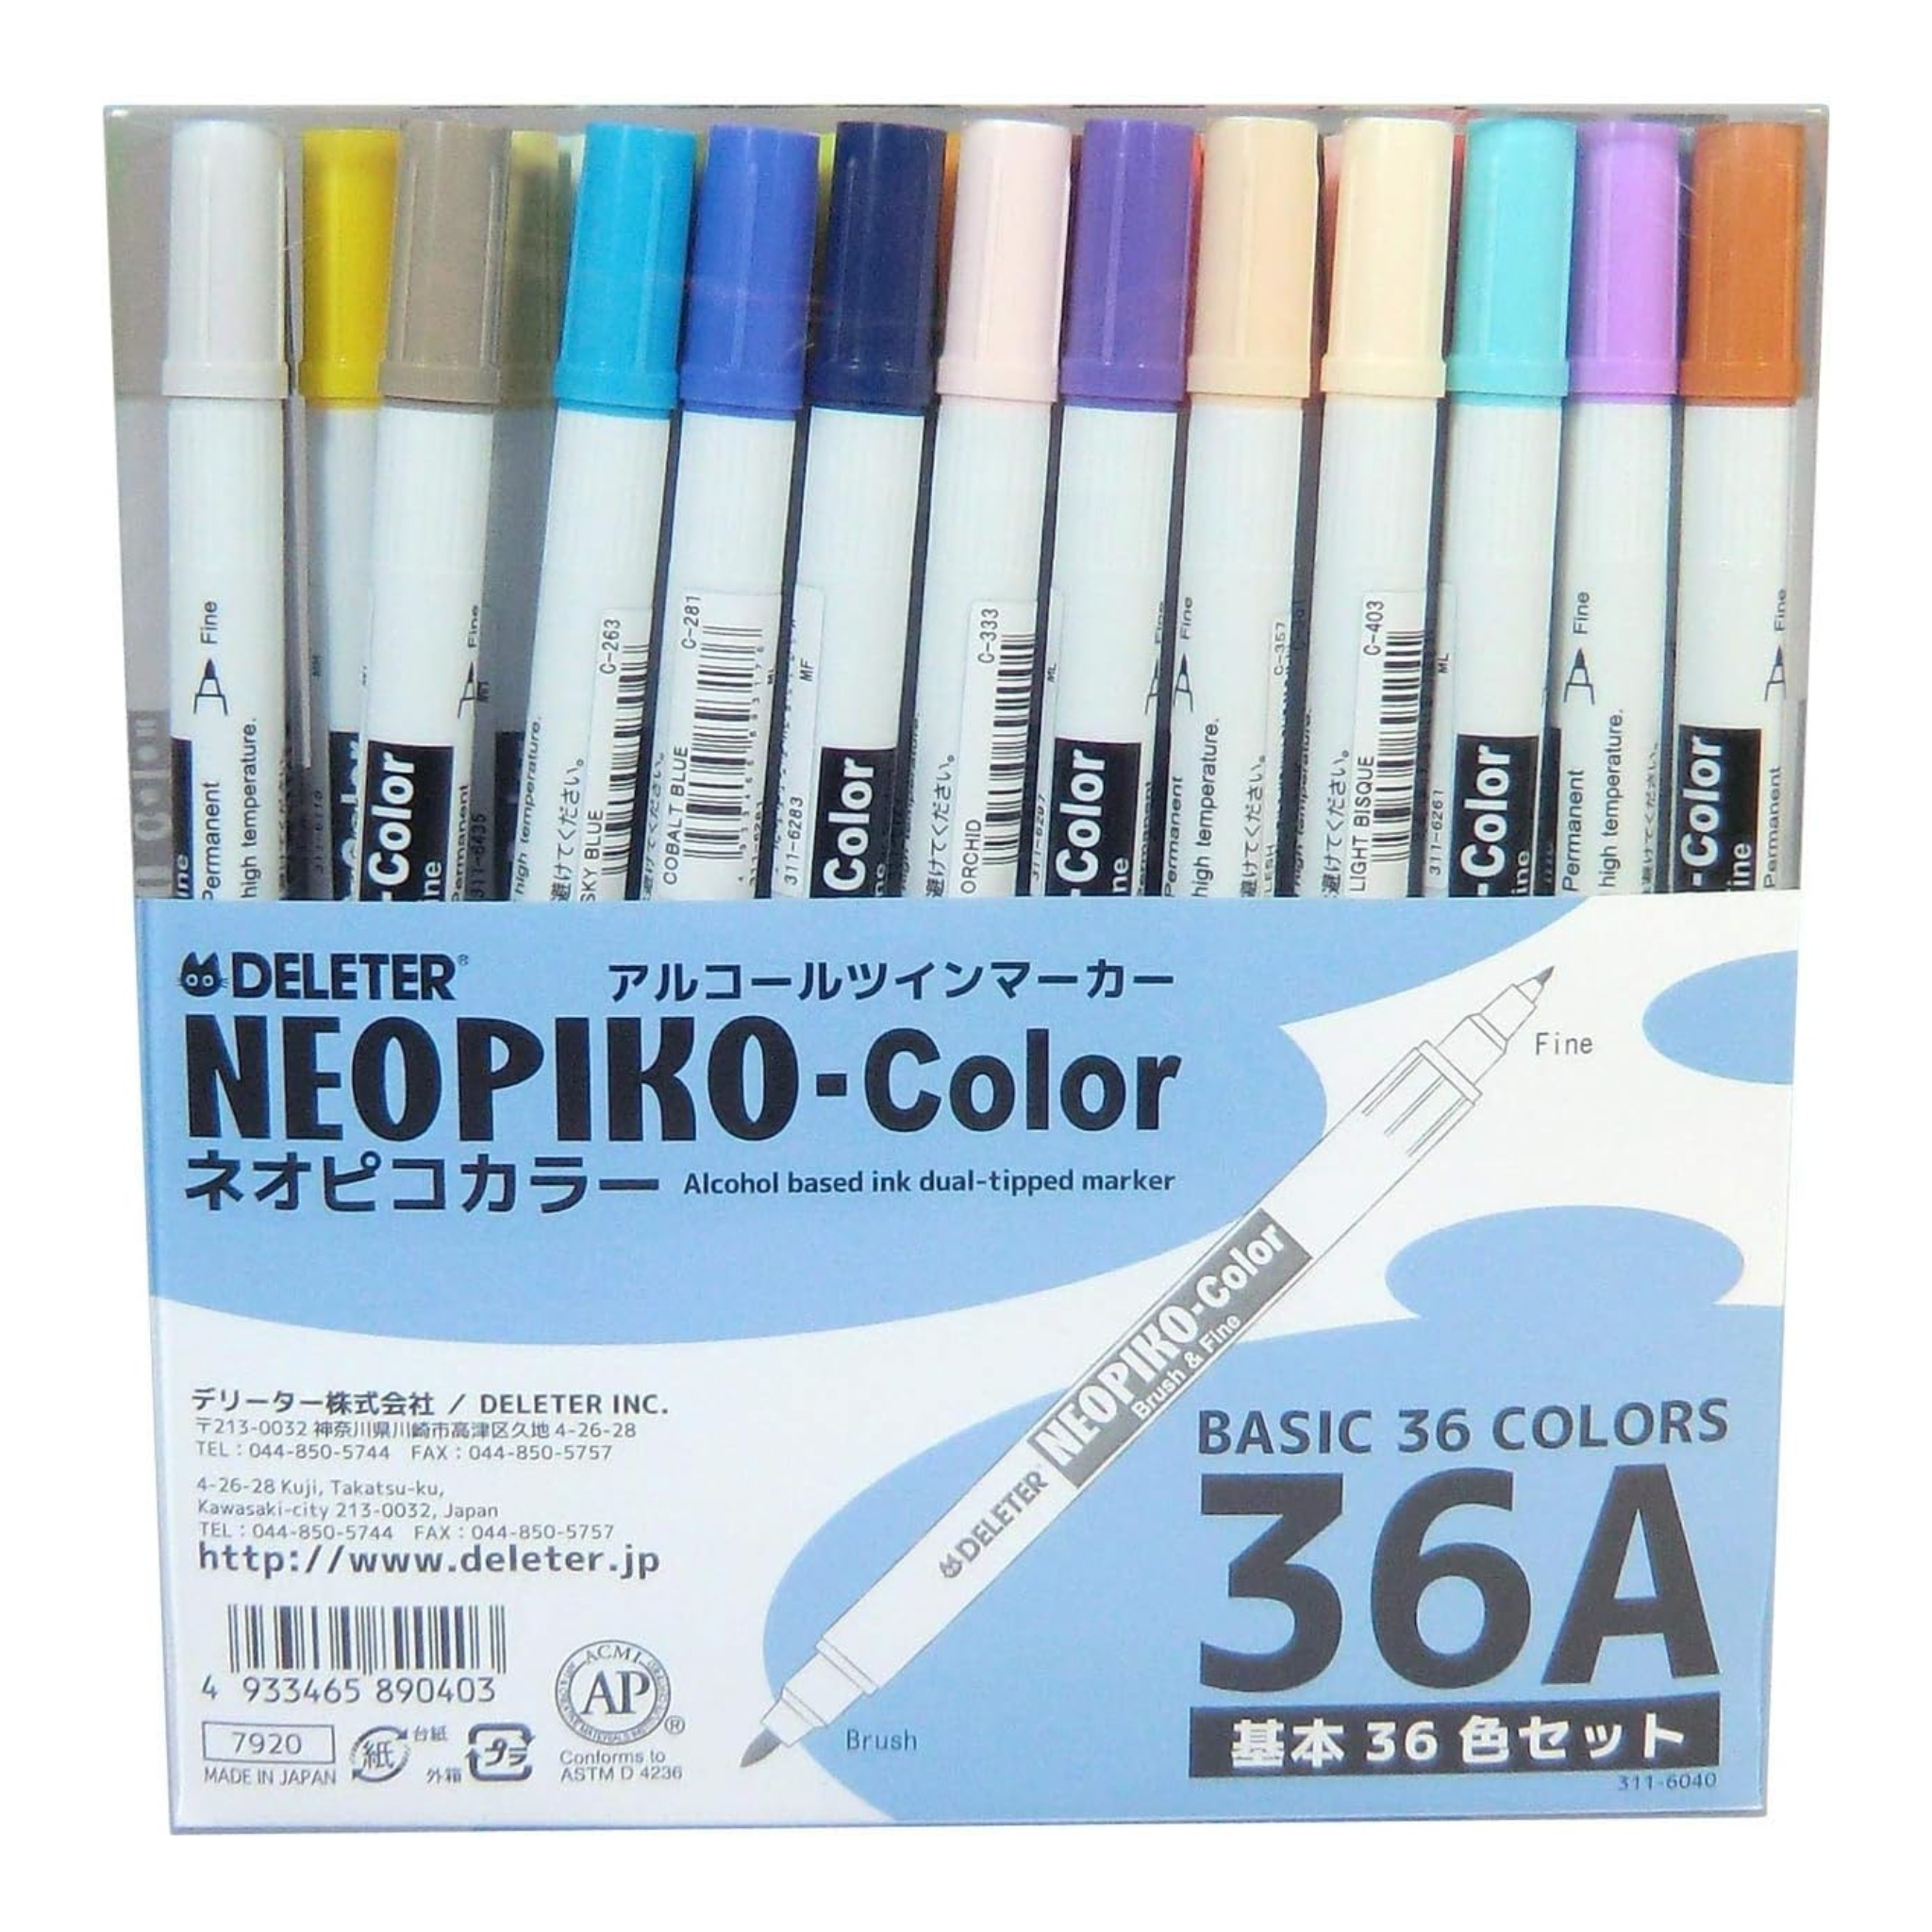 DELETER Neopiko Color, Basic 36 colors set A